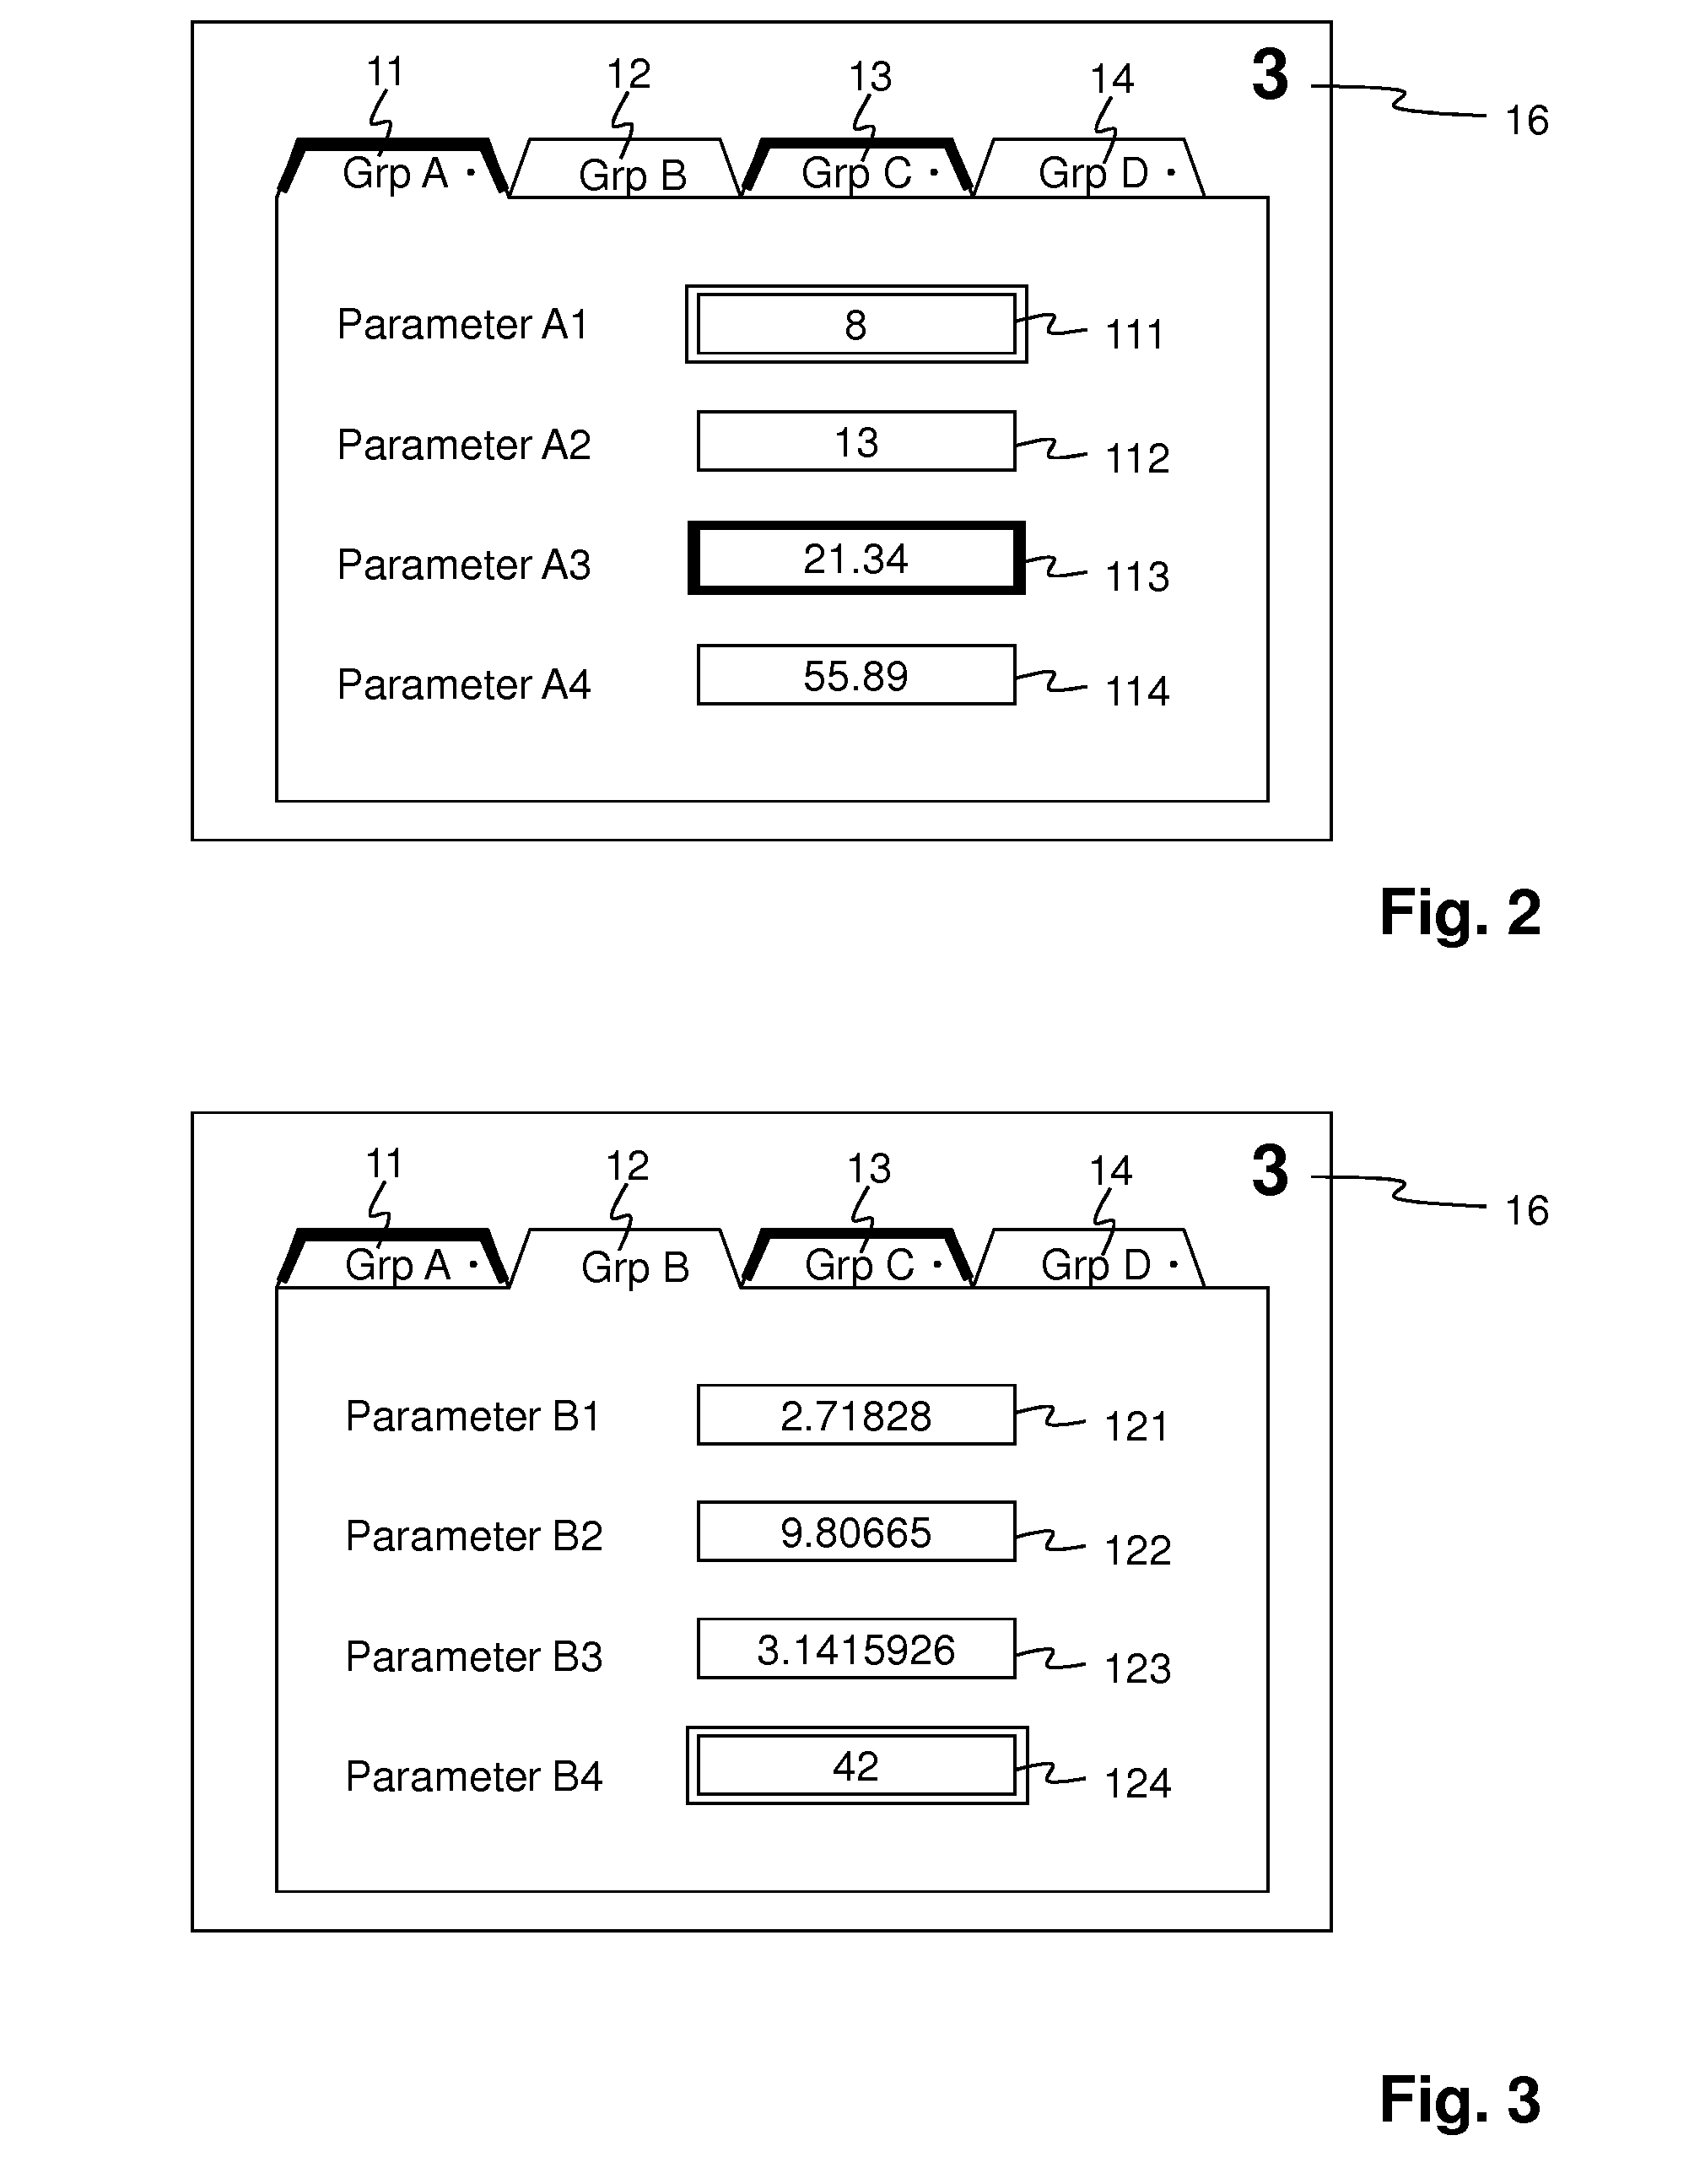 Method and system for processing and displaying sheet-metal-forming simulation parameters